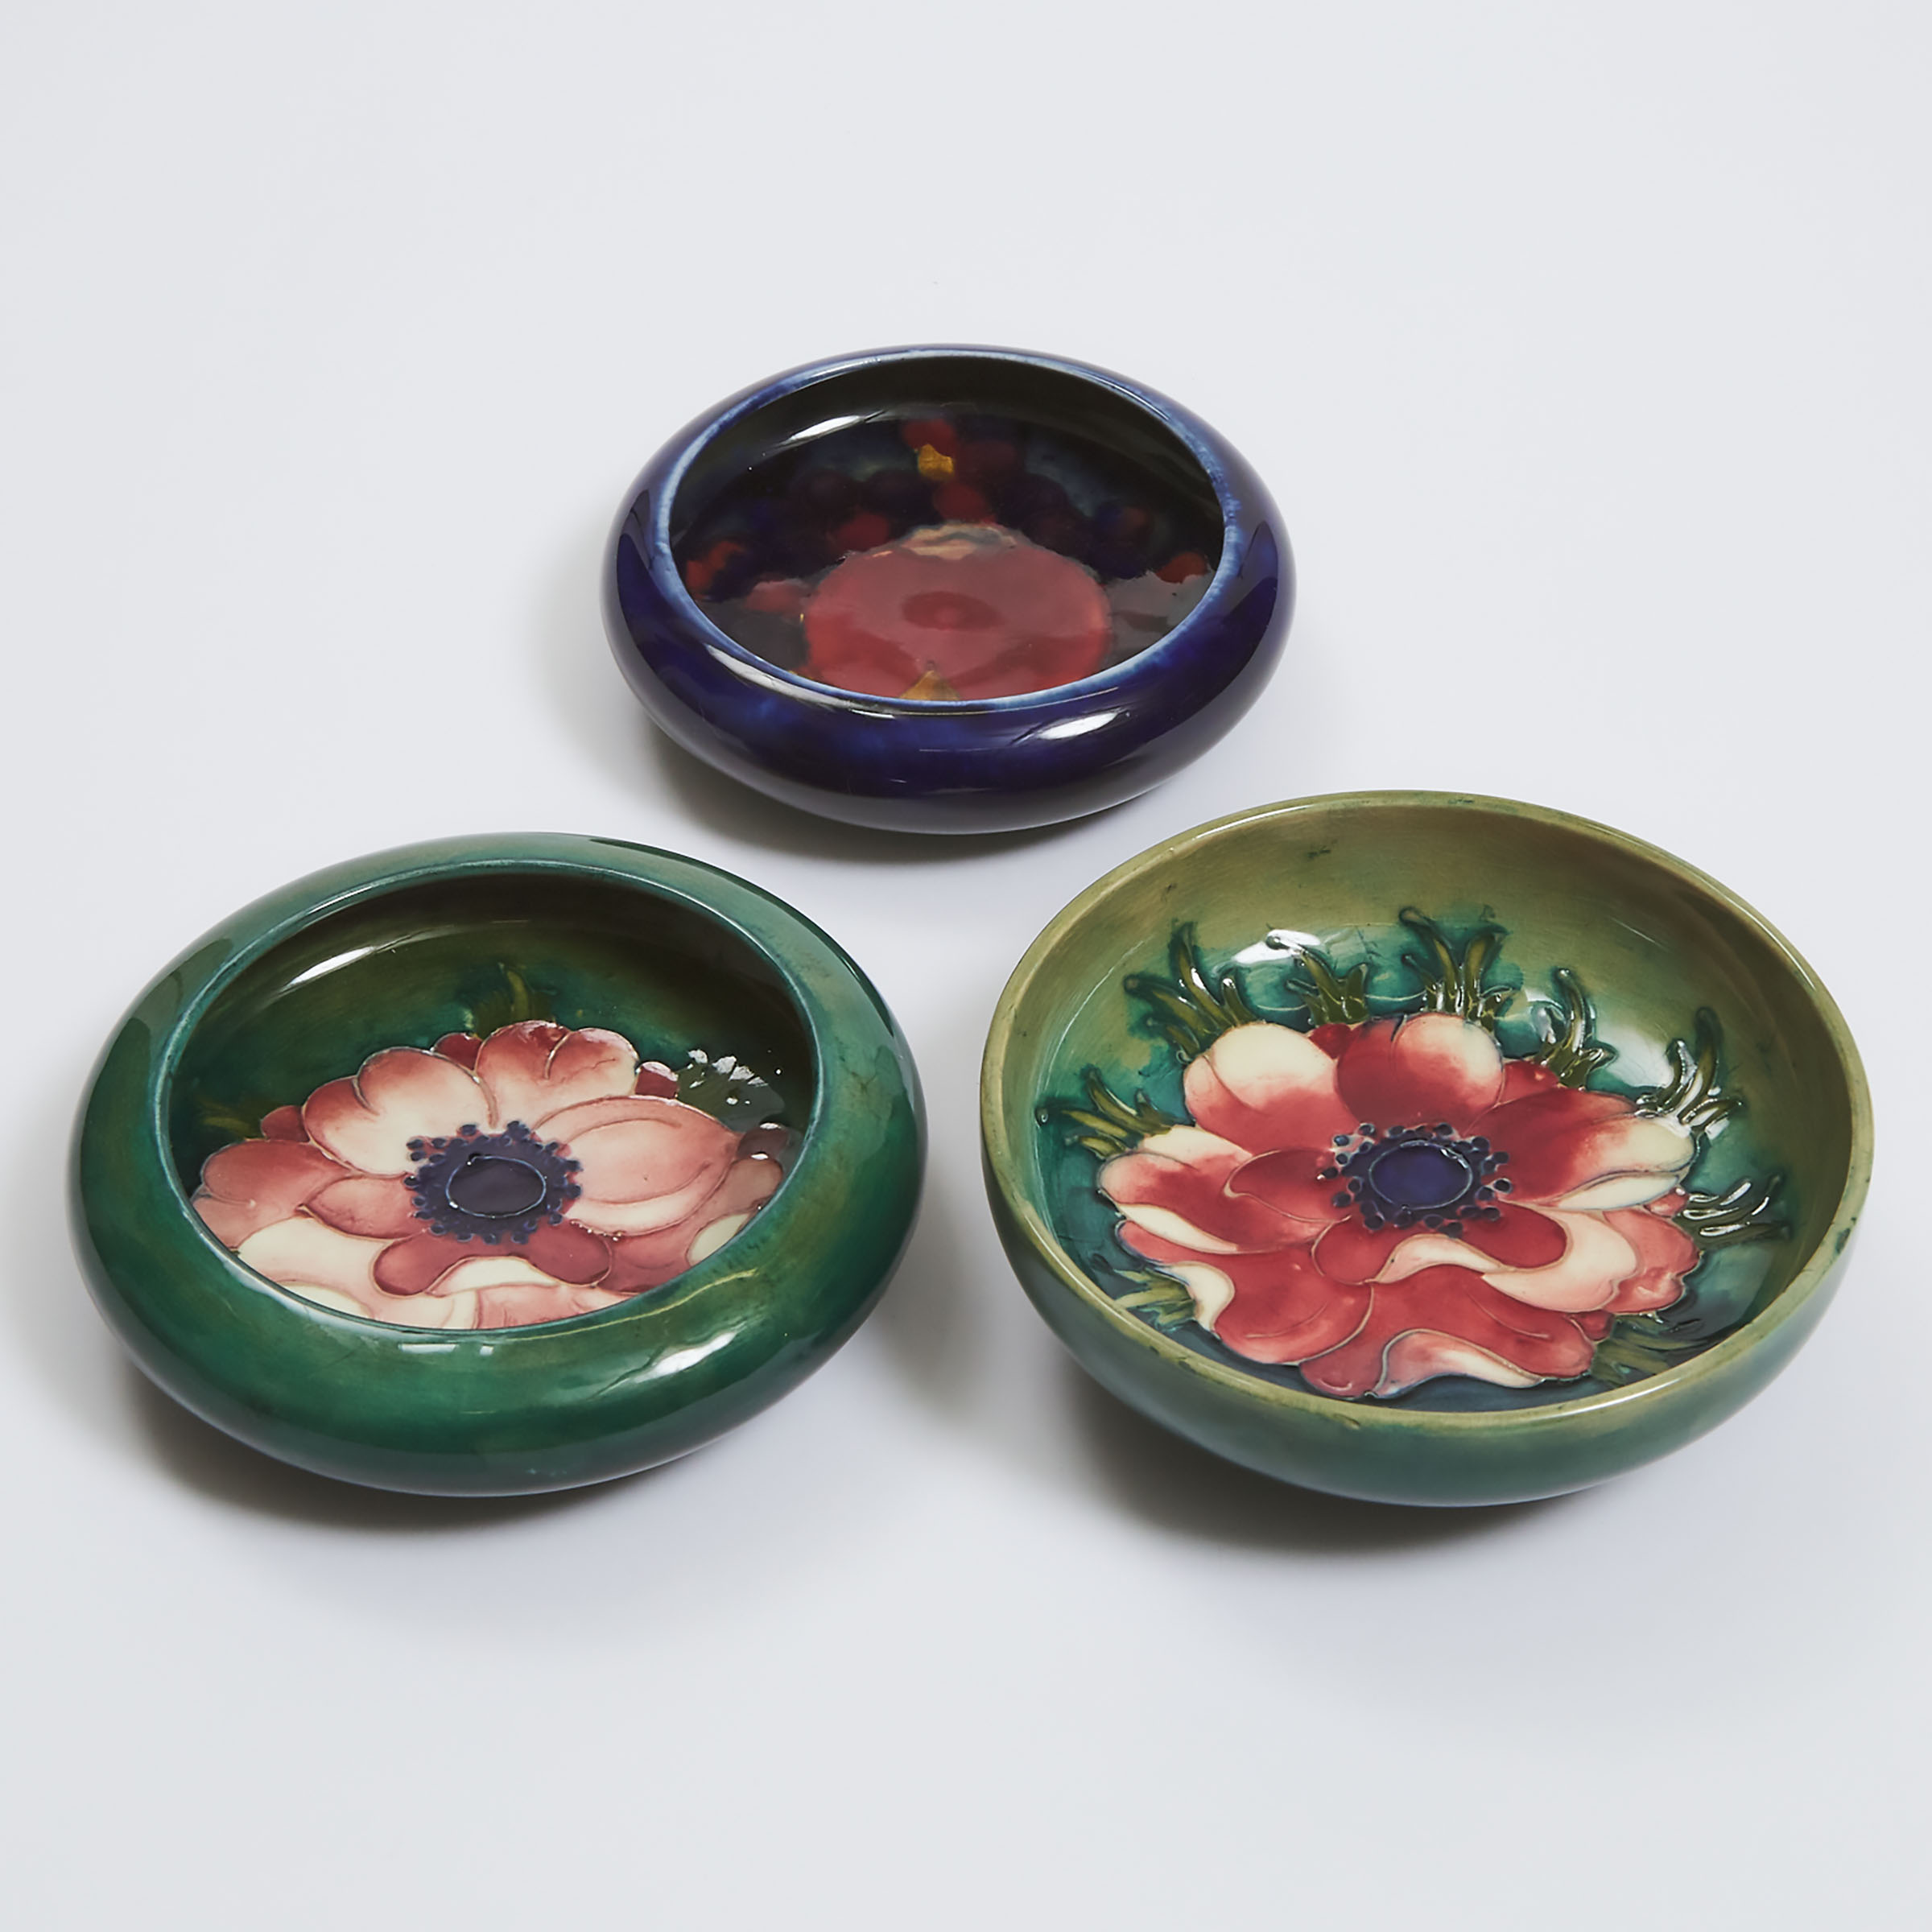 Three Small Moorcroft Anemone and Pomegranate Dishes, mid-20th century